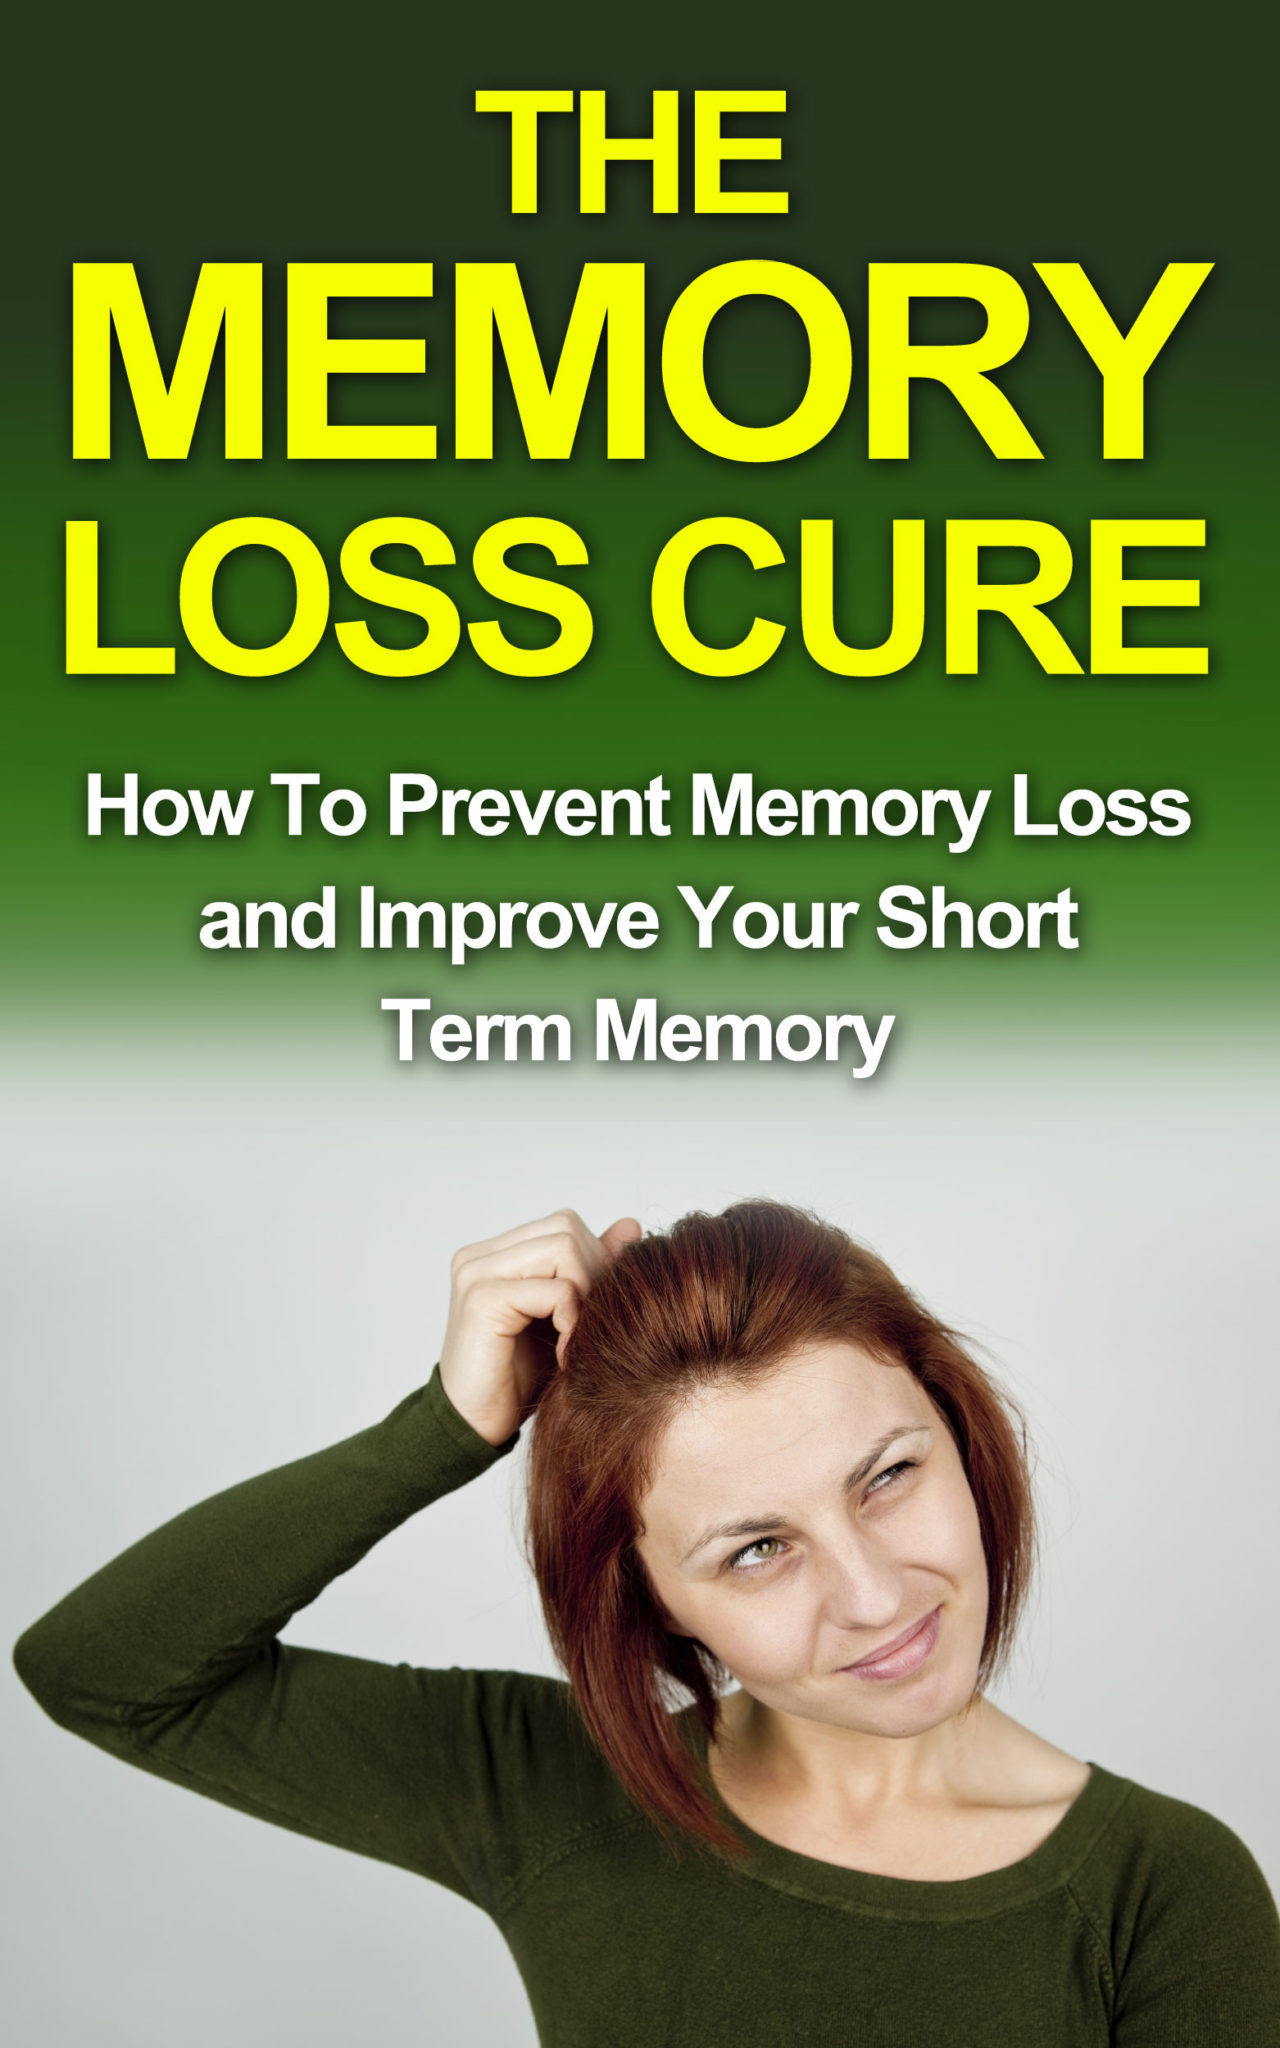 FREE: The Memory Loss Cure: How to Prevent Memory Loss and Improve Your Short Term Memory by Michelle Taylor